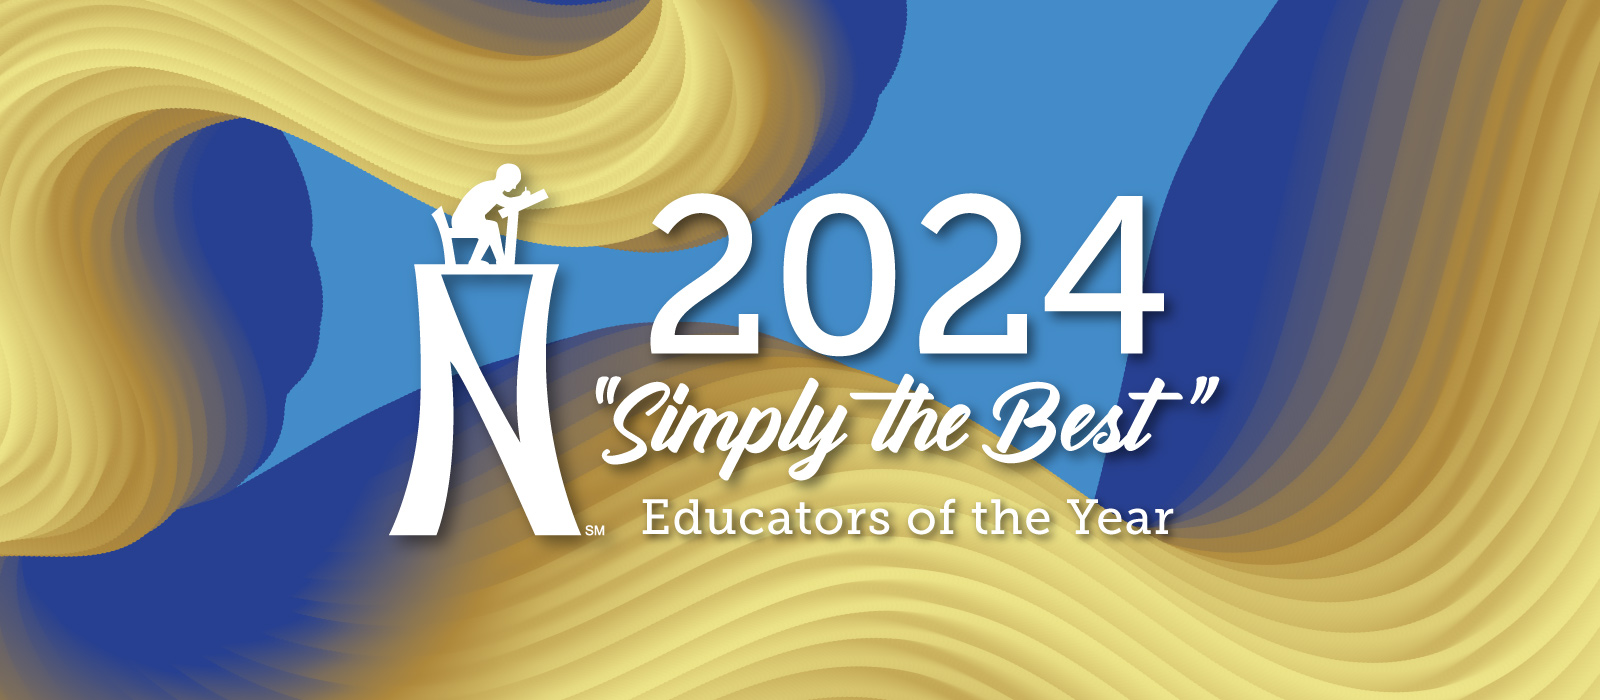 Campus Educators of the Year announced